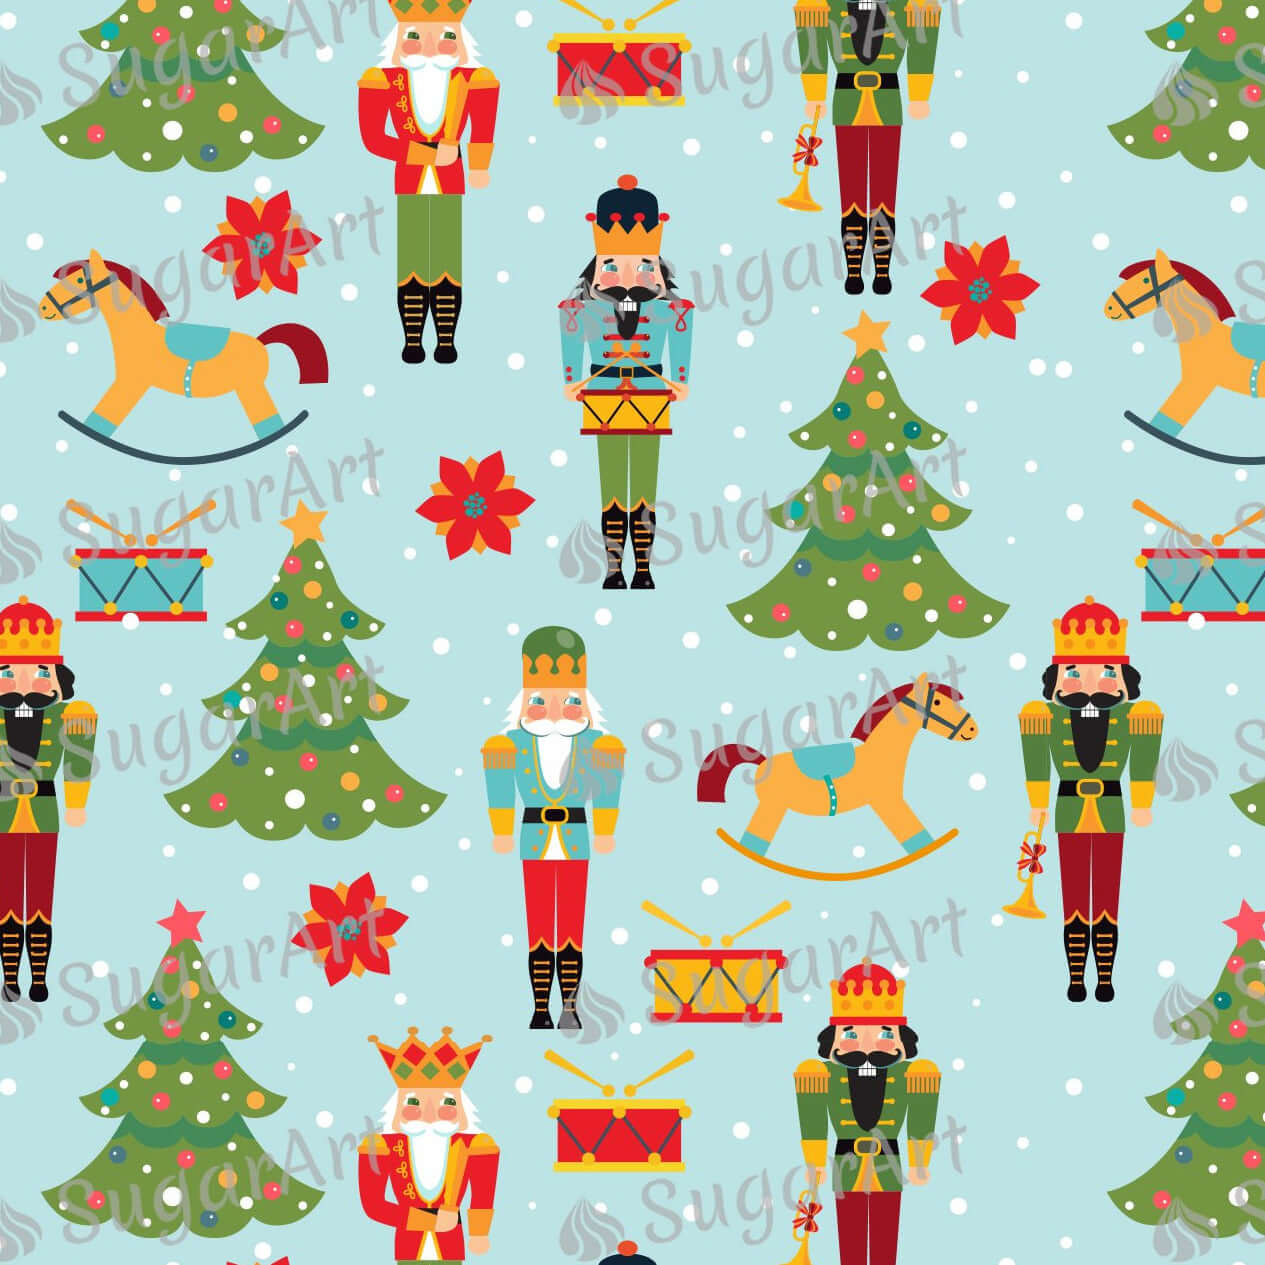 Christmas Pattern with Nutcrackers Trees - Icing - ISA123.